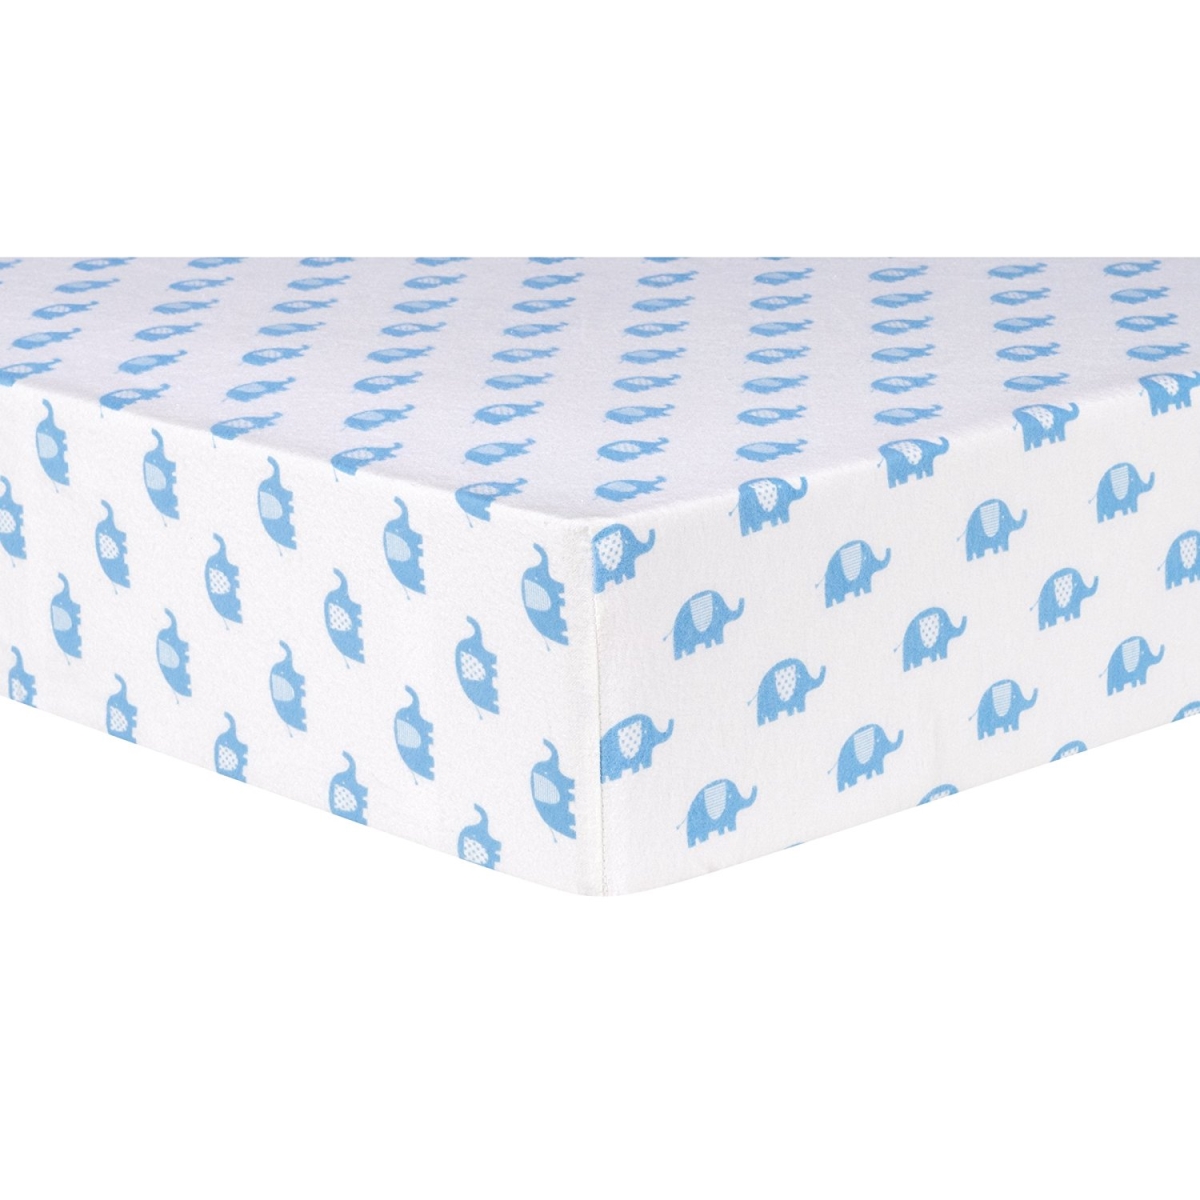 102742 Blue Elephants Deluxe Flannel Fitted Crib Sheet, Blue & White<br>